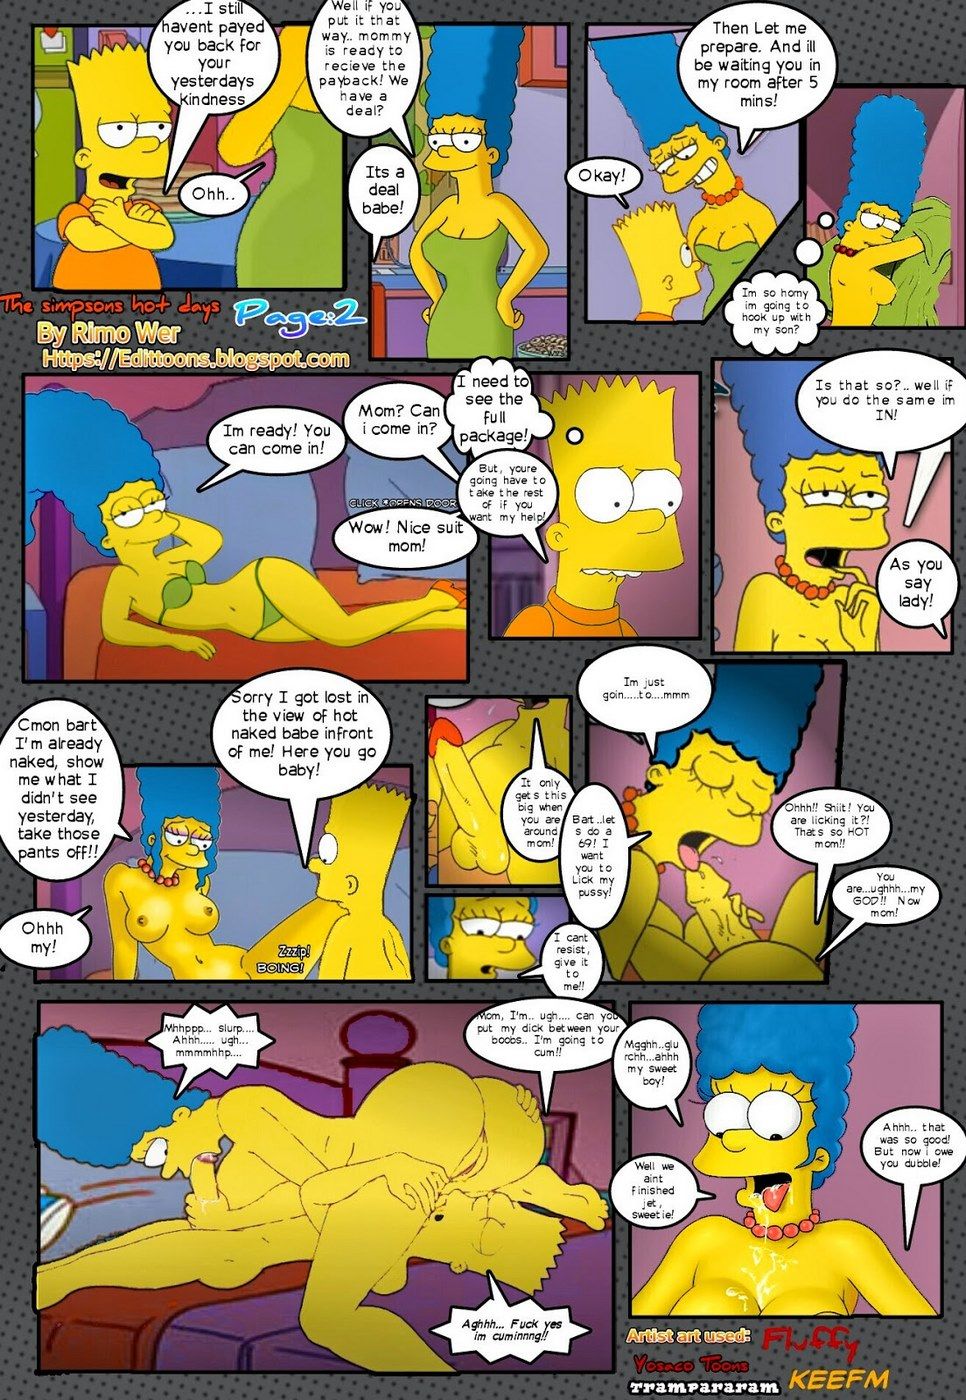 Rimo Wer - The Simpsons Hot Days 2 page 2